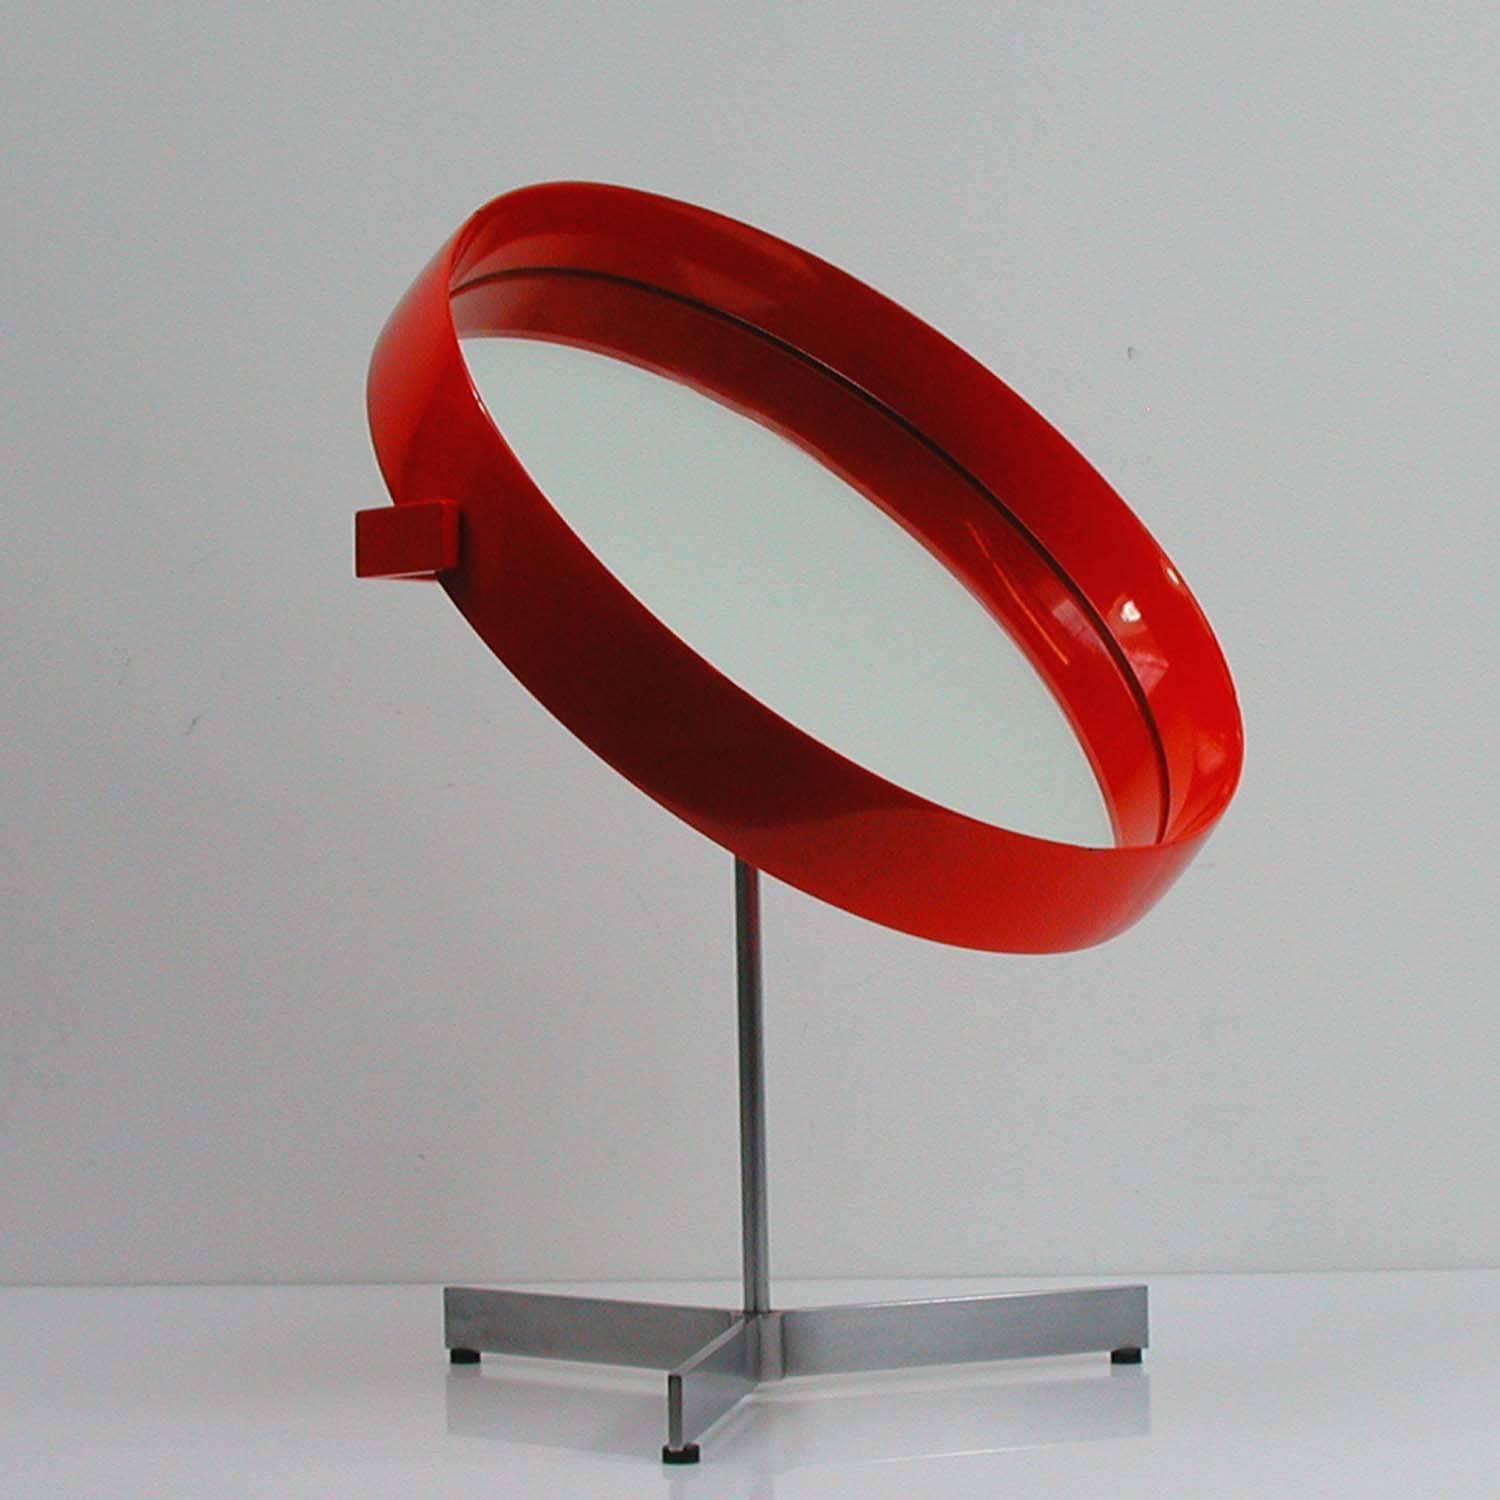 Very rare red table mirror by Uno and Osten Kristiansson for Luxus Vittsjö, made in Sweden in the 1960s.
The mirror has hot a red lacquered frame and a steel tripod foot. The mirror is adjustable.
 